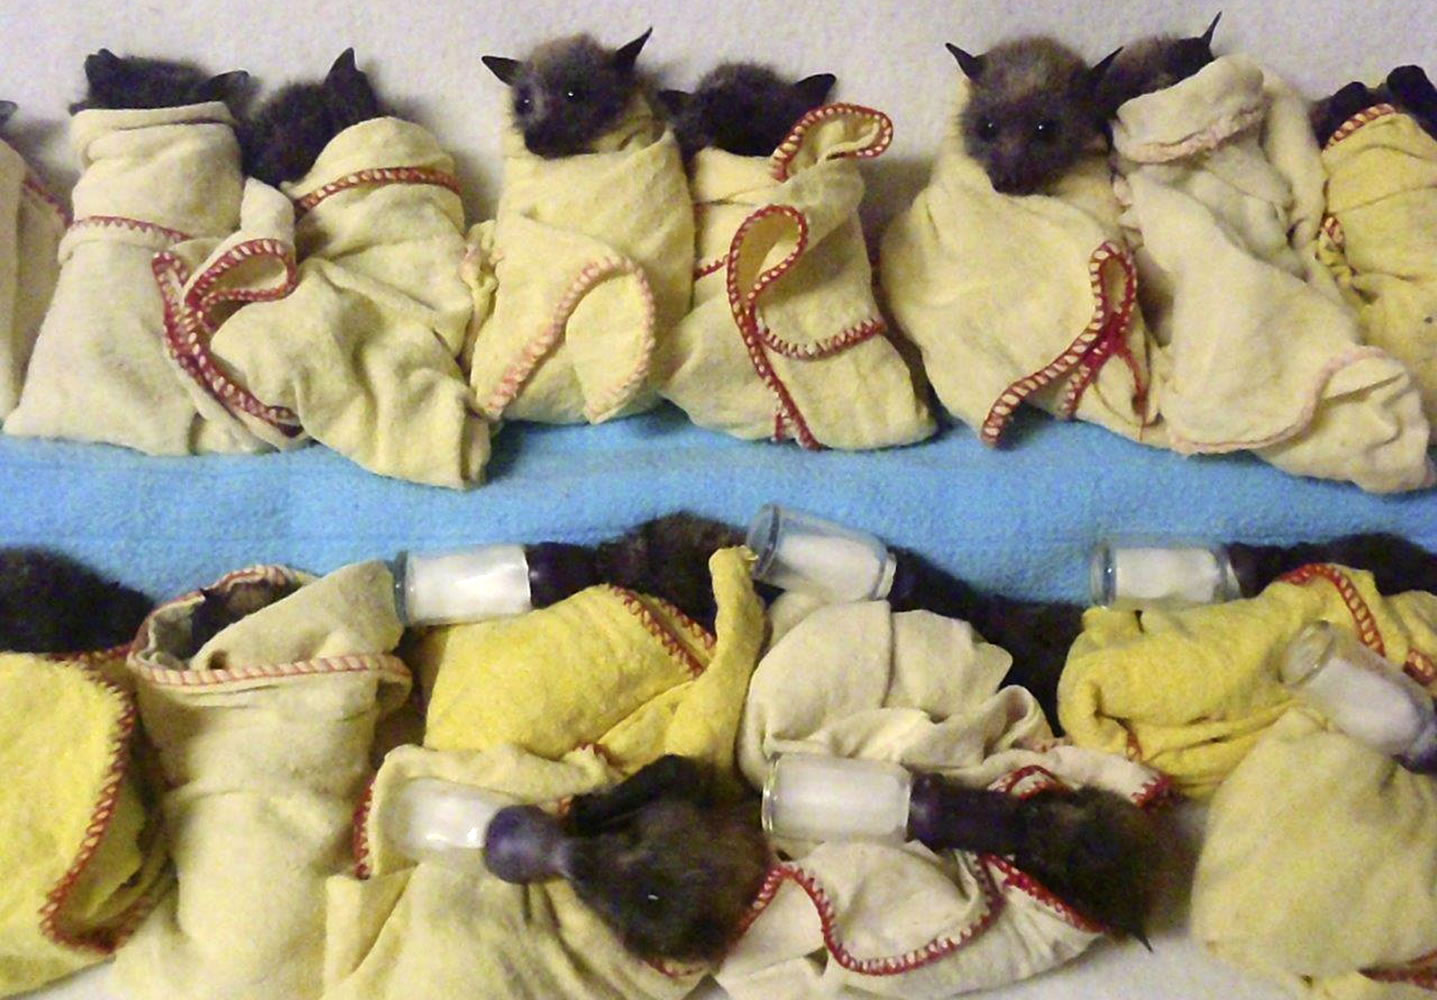 Fifteen heat-stressed baby flying foxes are lined up ready to feed Thursday at the Australia Bat Clinic near the Gold Coast in Queensland, Australia.